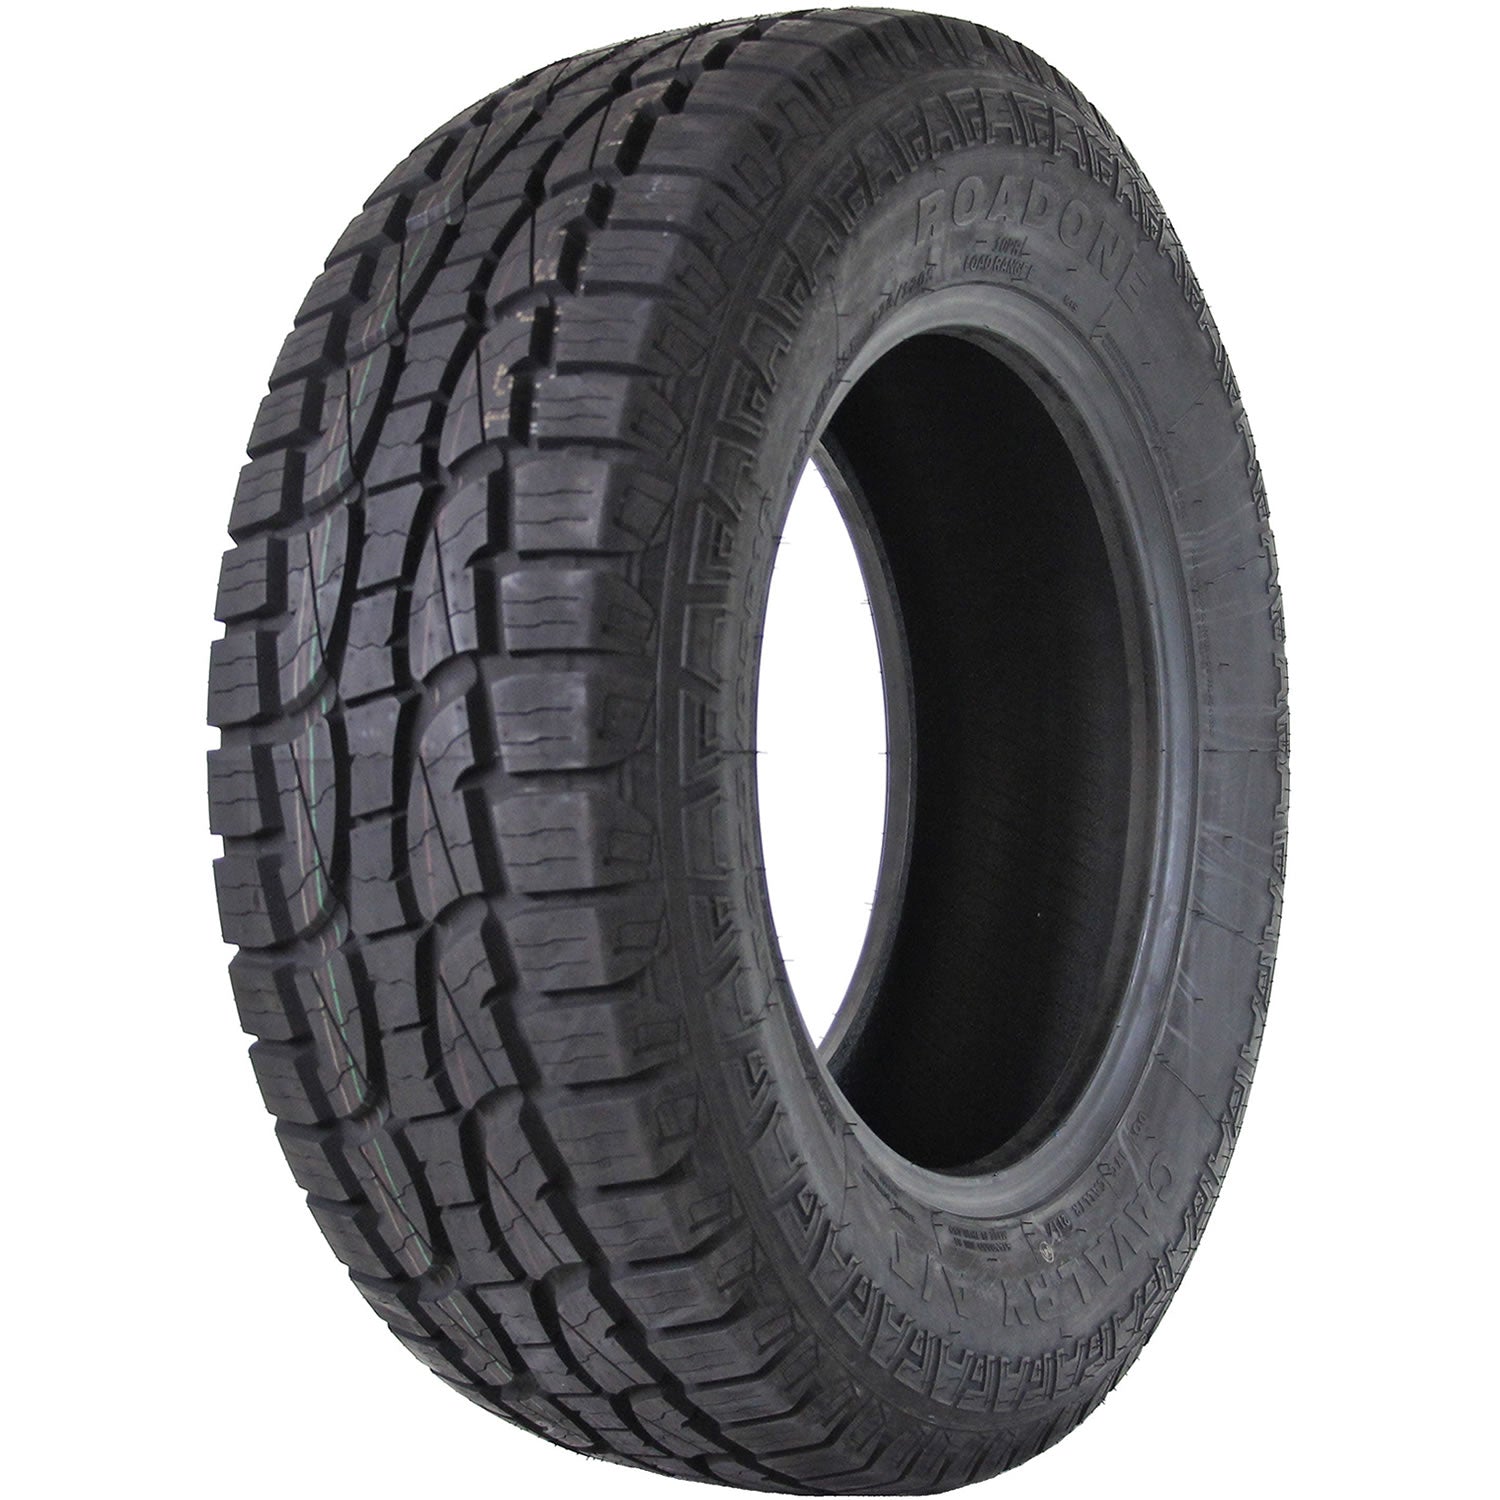 ROAD ONE CAVALRY A/T LT275/65R18 (32.1X11R 18) Tires